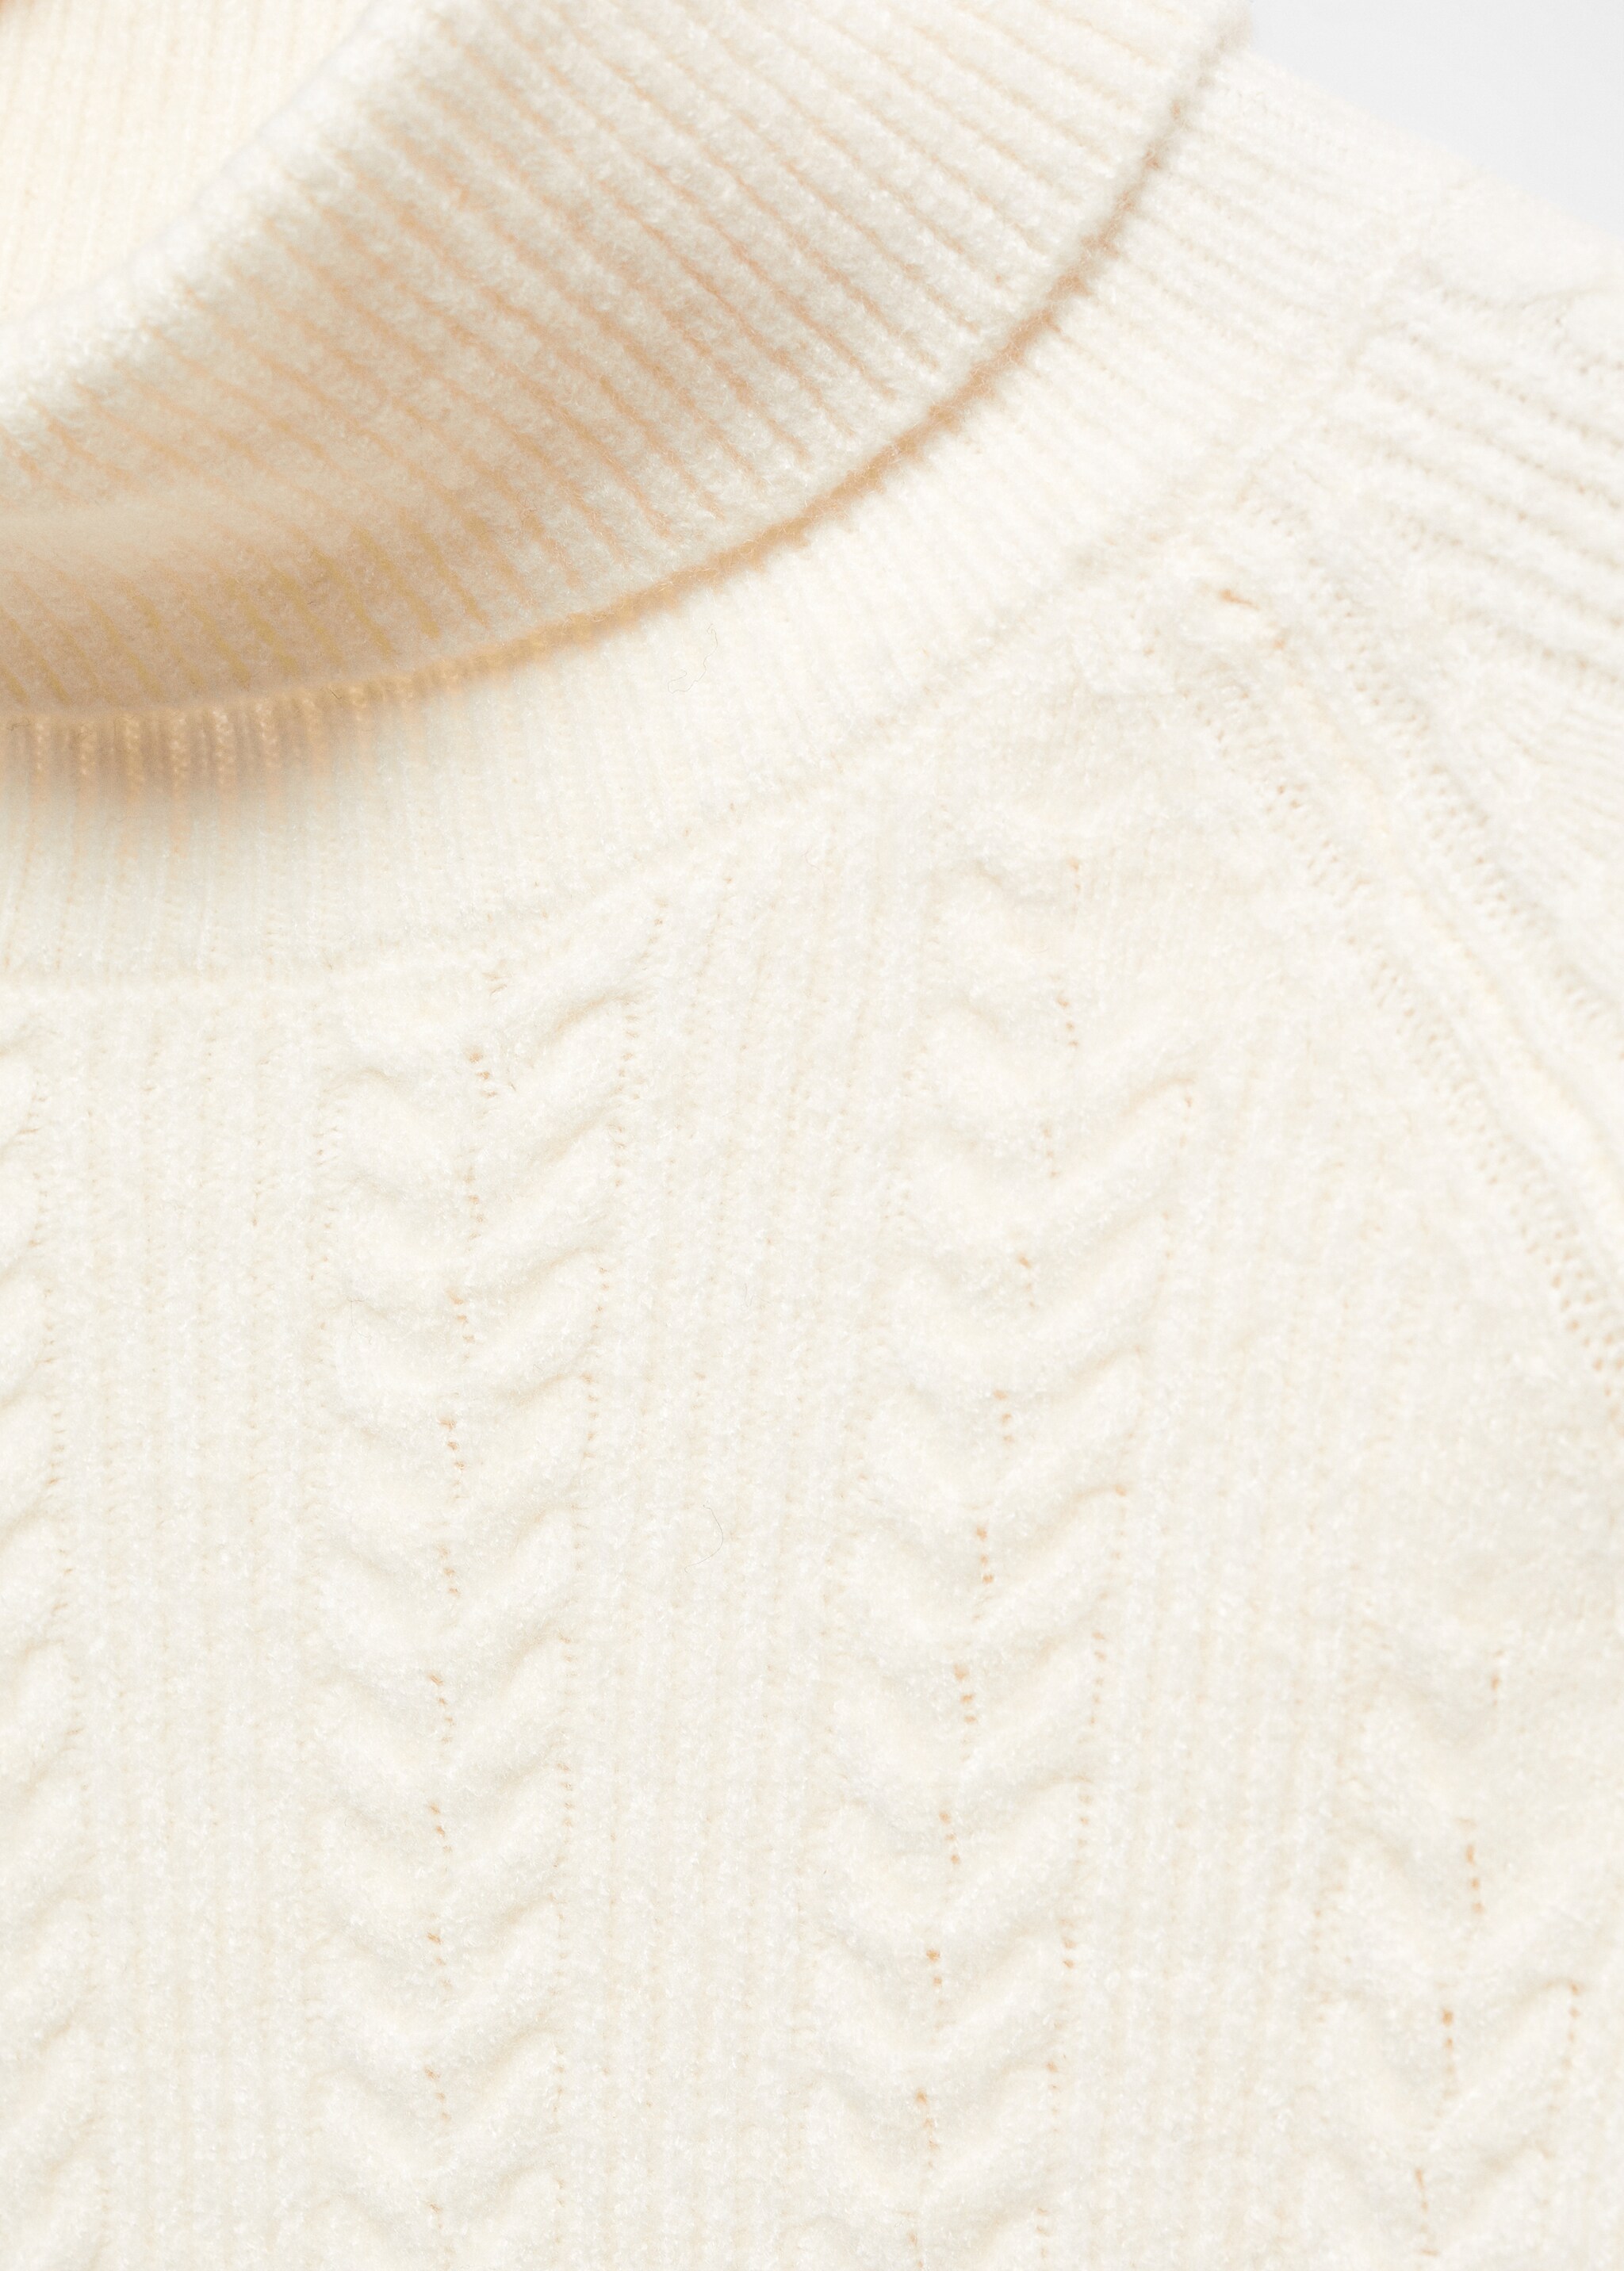 Twisted turtleneck sweater - Details of the article 8